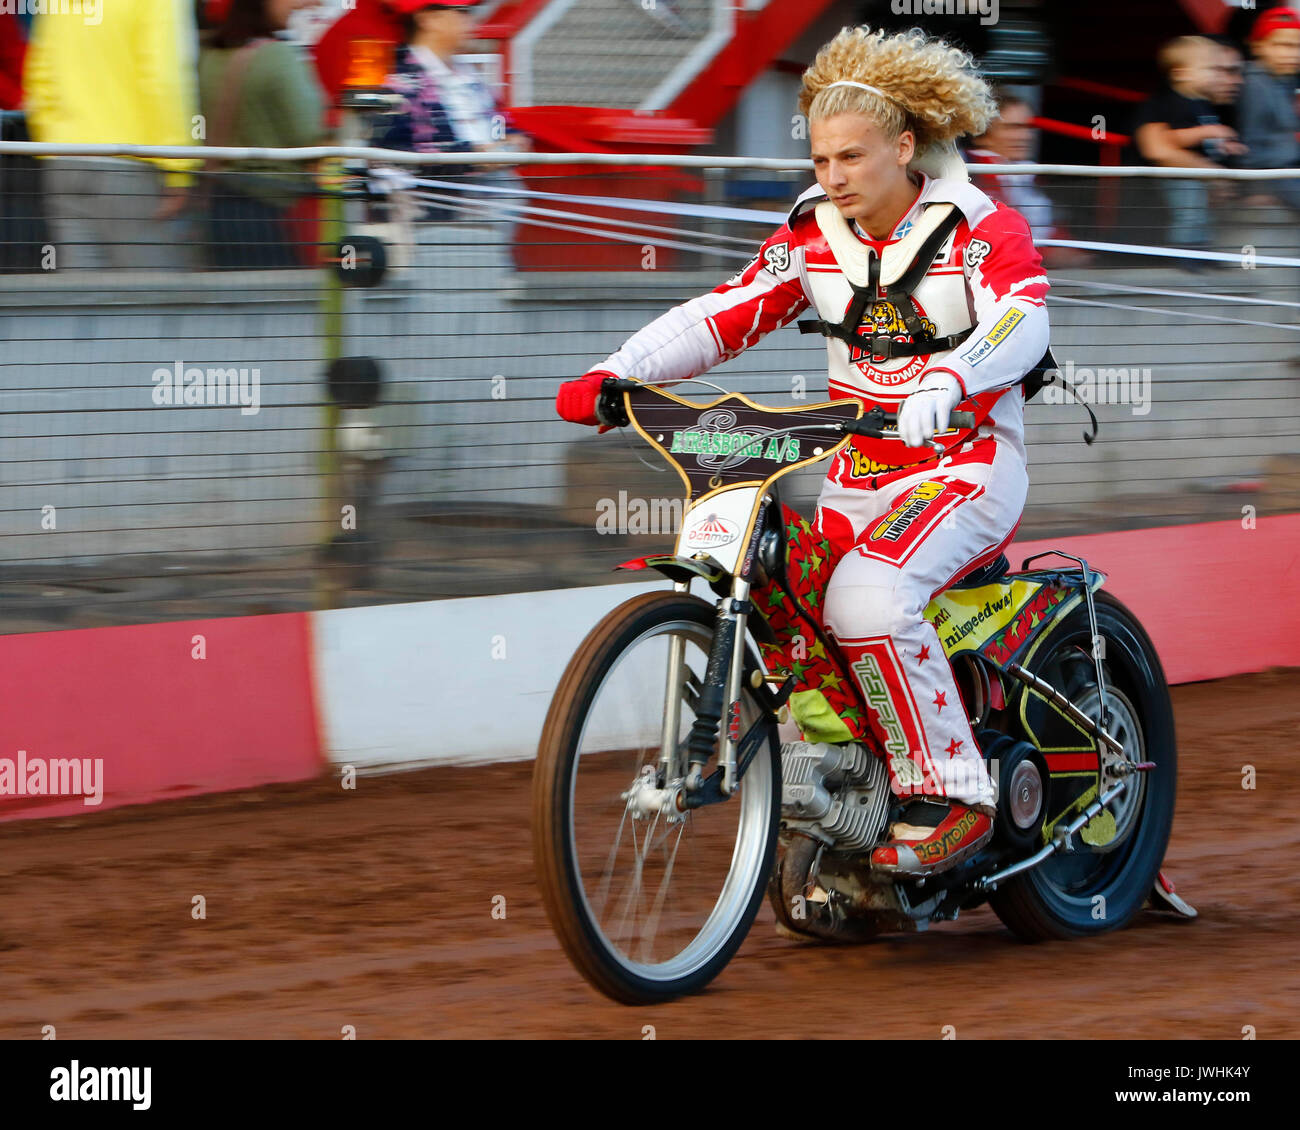 Glasgow, Scotland, UK. 12th August, 2017. Welcome your Glasgow Tigers Credit: Colin Poultney/Alamy Live News Stock Photo